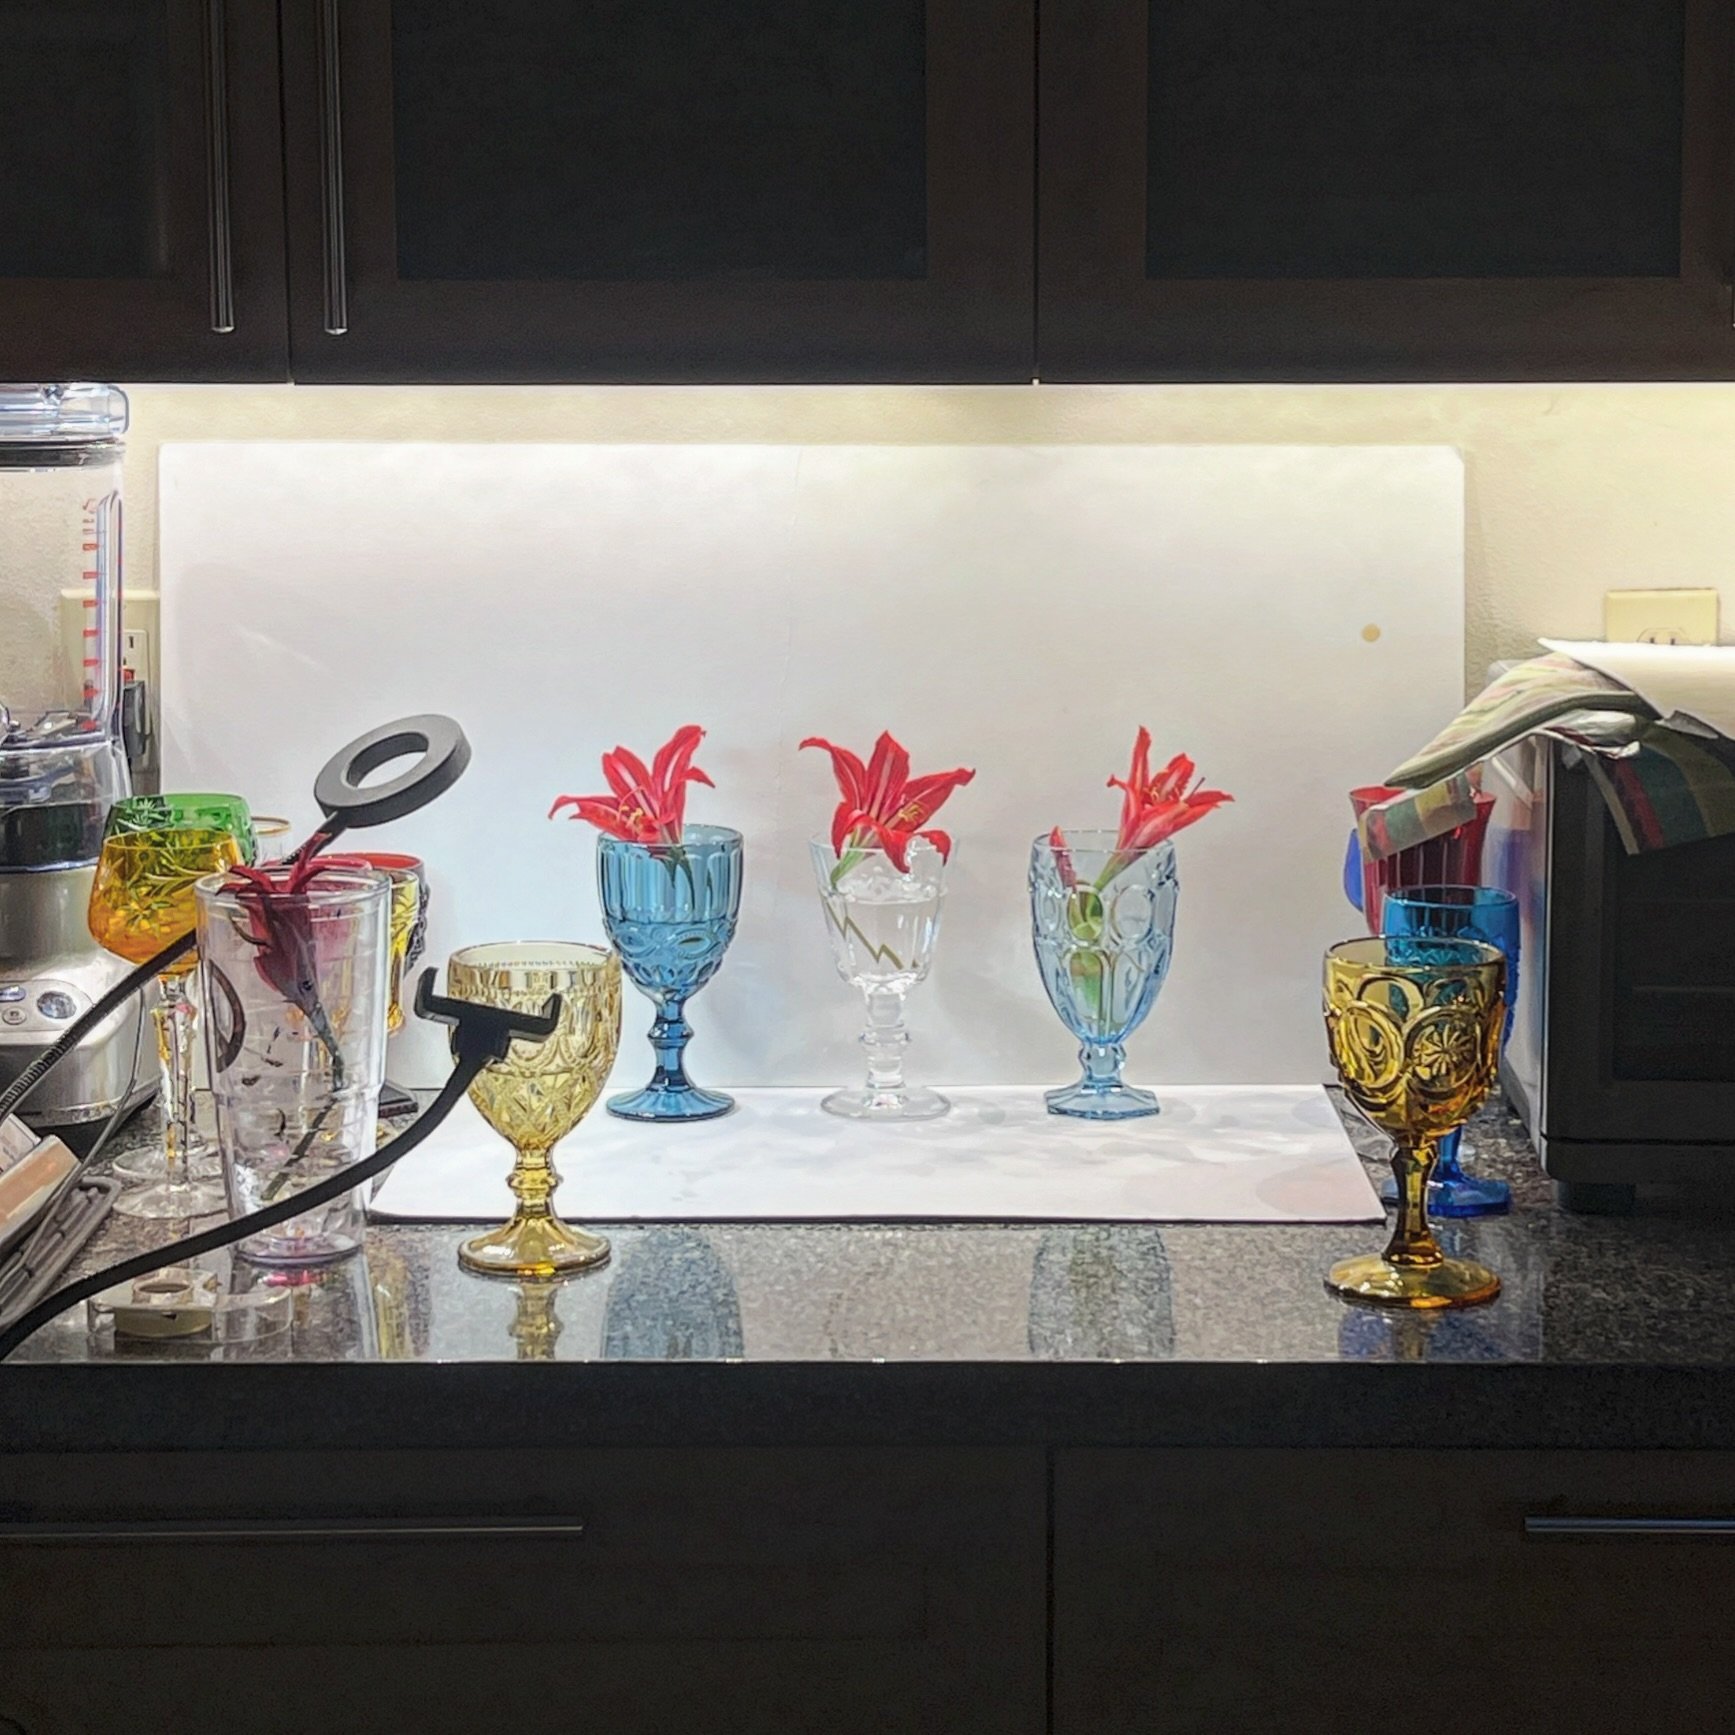 How do you like my photography studio? Set between the blender and the toaster oven, this counter is where the magic happens. 😂

The amaryllis are blooming in my garden and I wondered if they could pull off being center stage in a glass still life. 